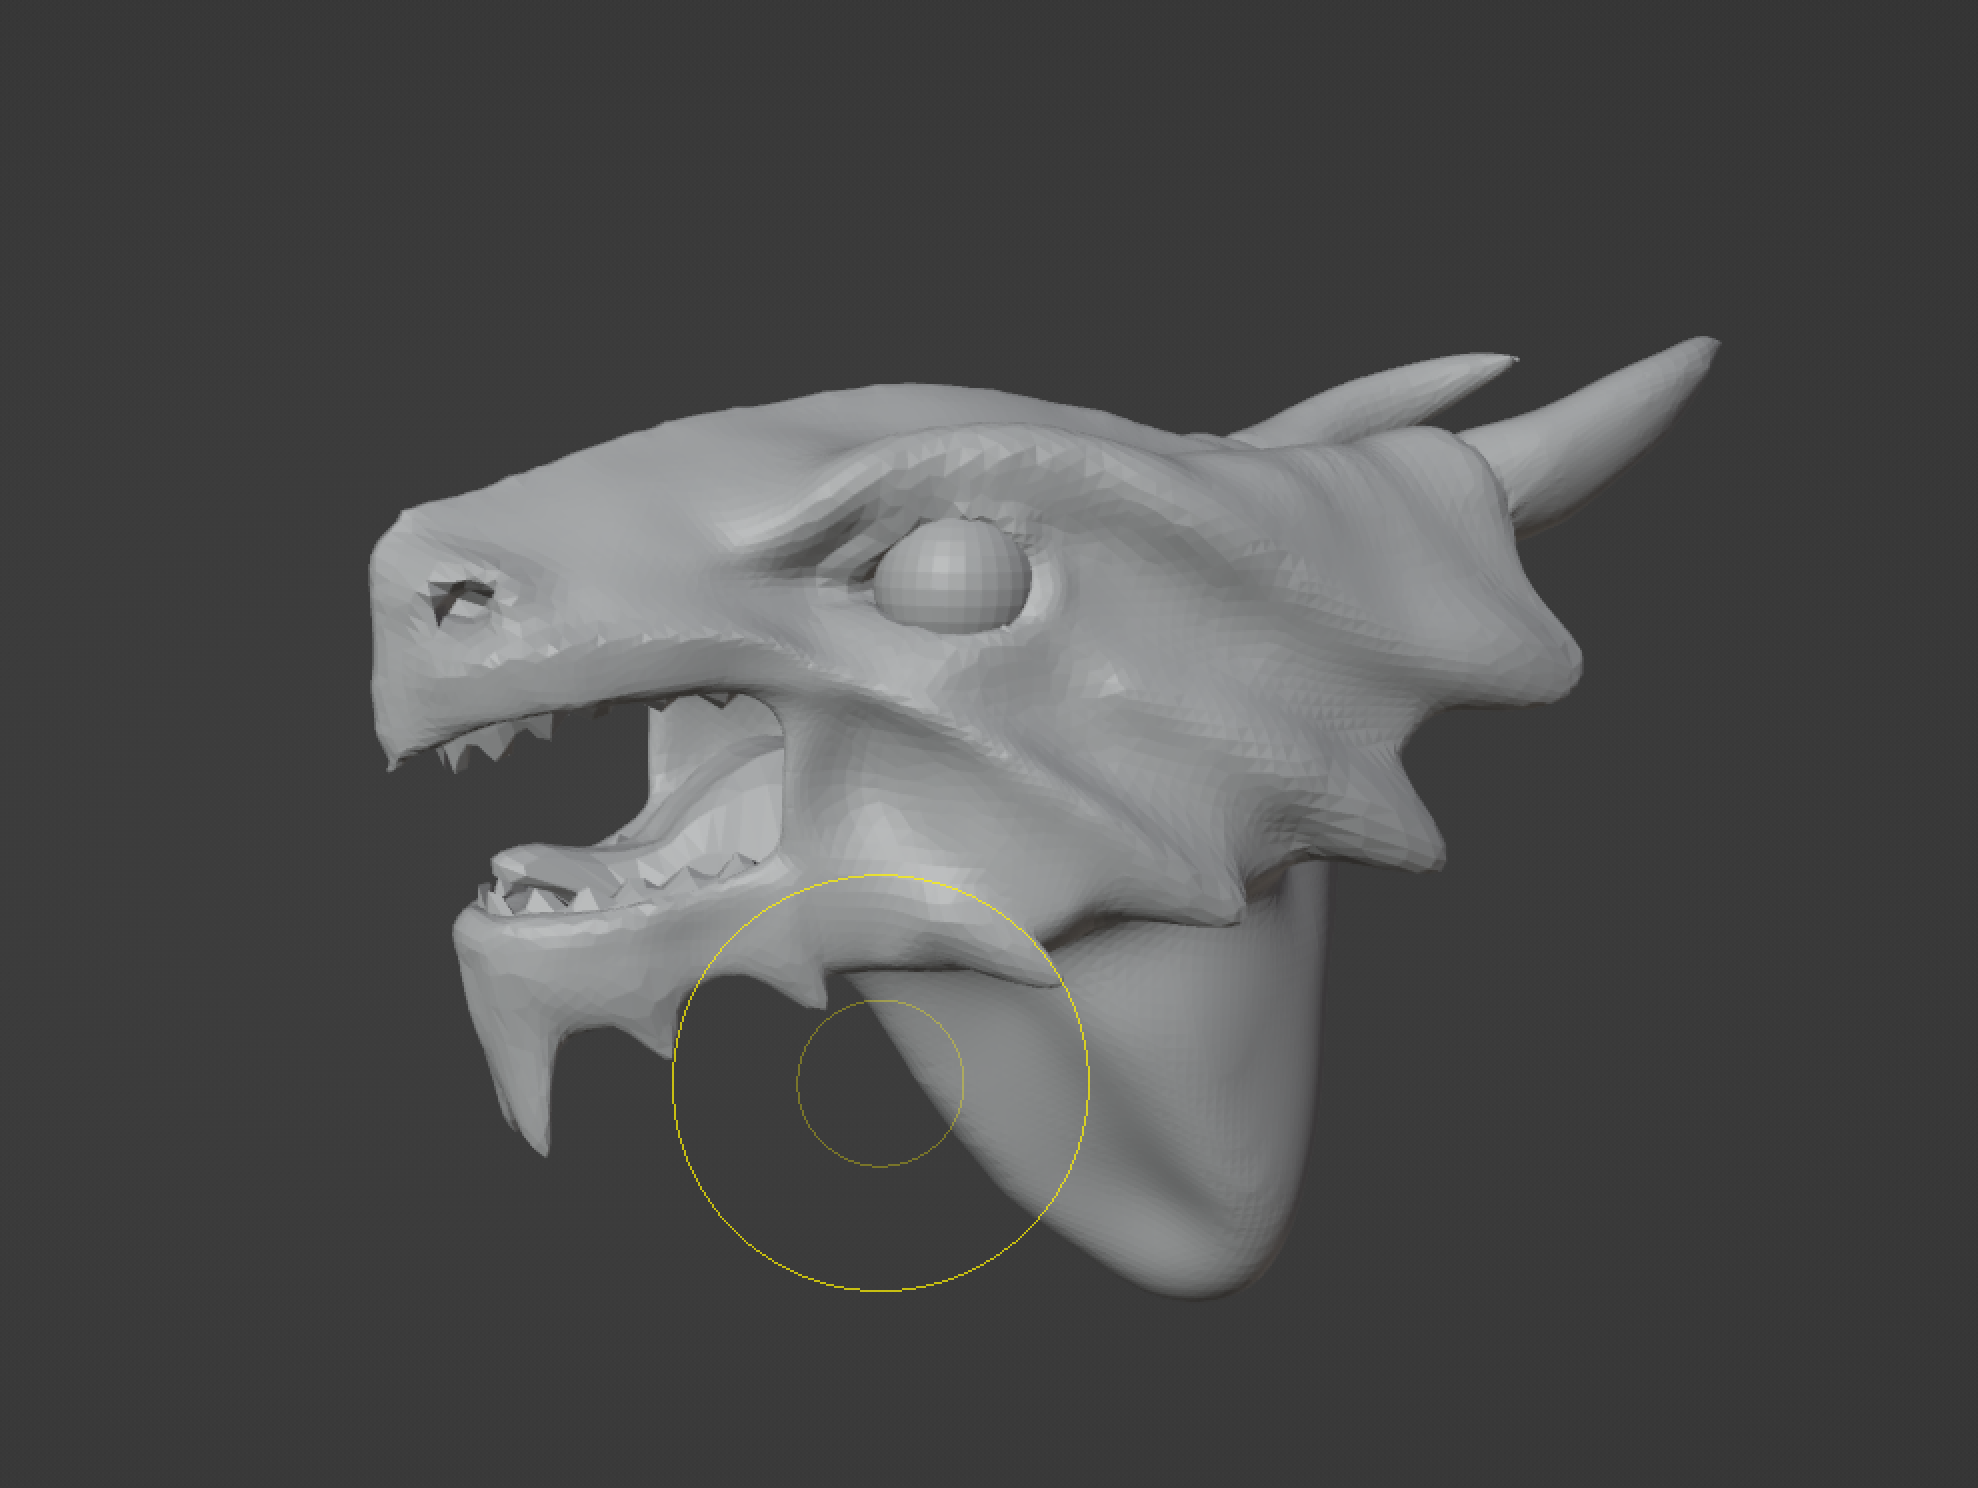 A low poly dragon mesh, but this time it has eyes and is a little more detailed